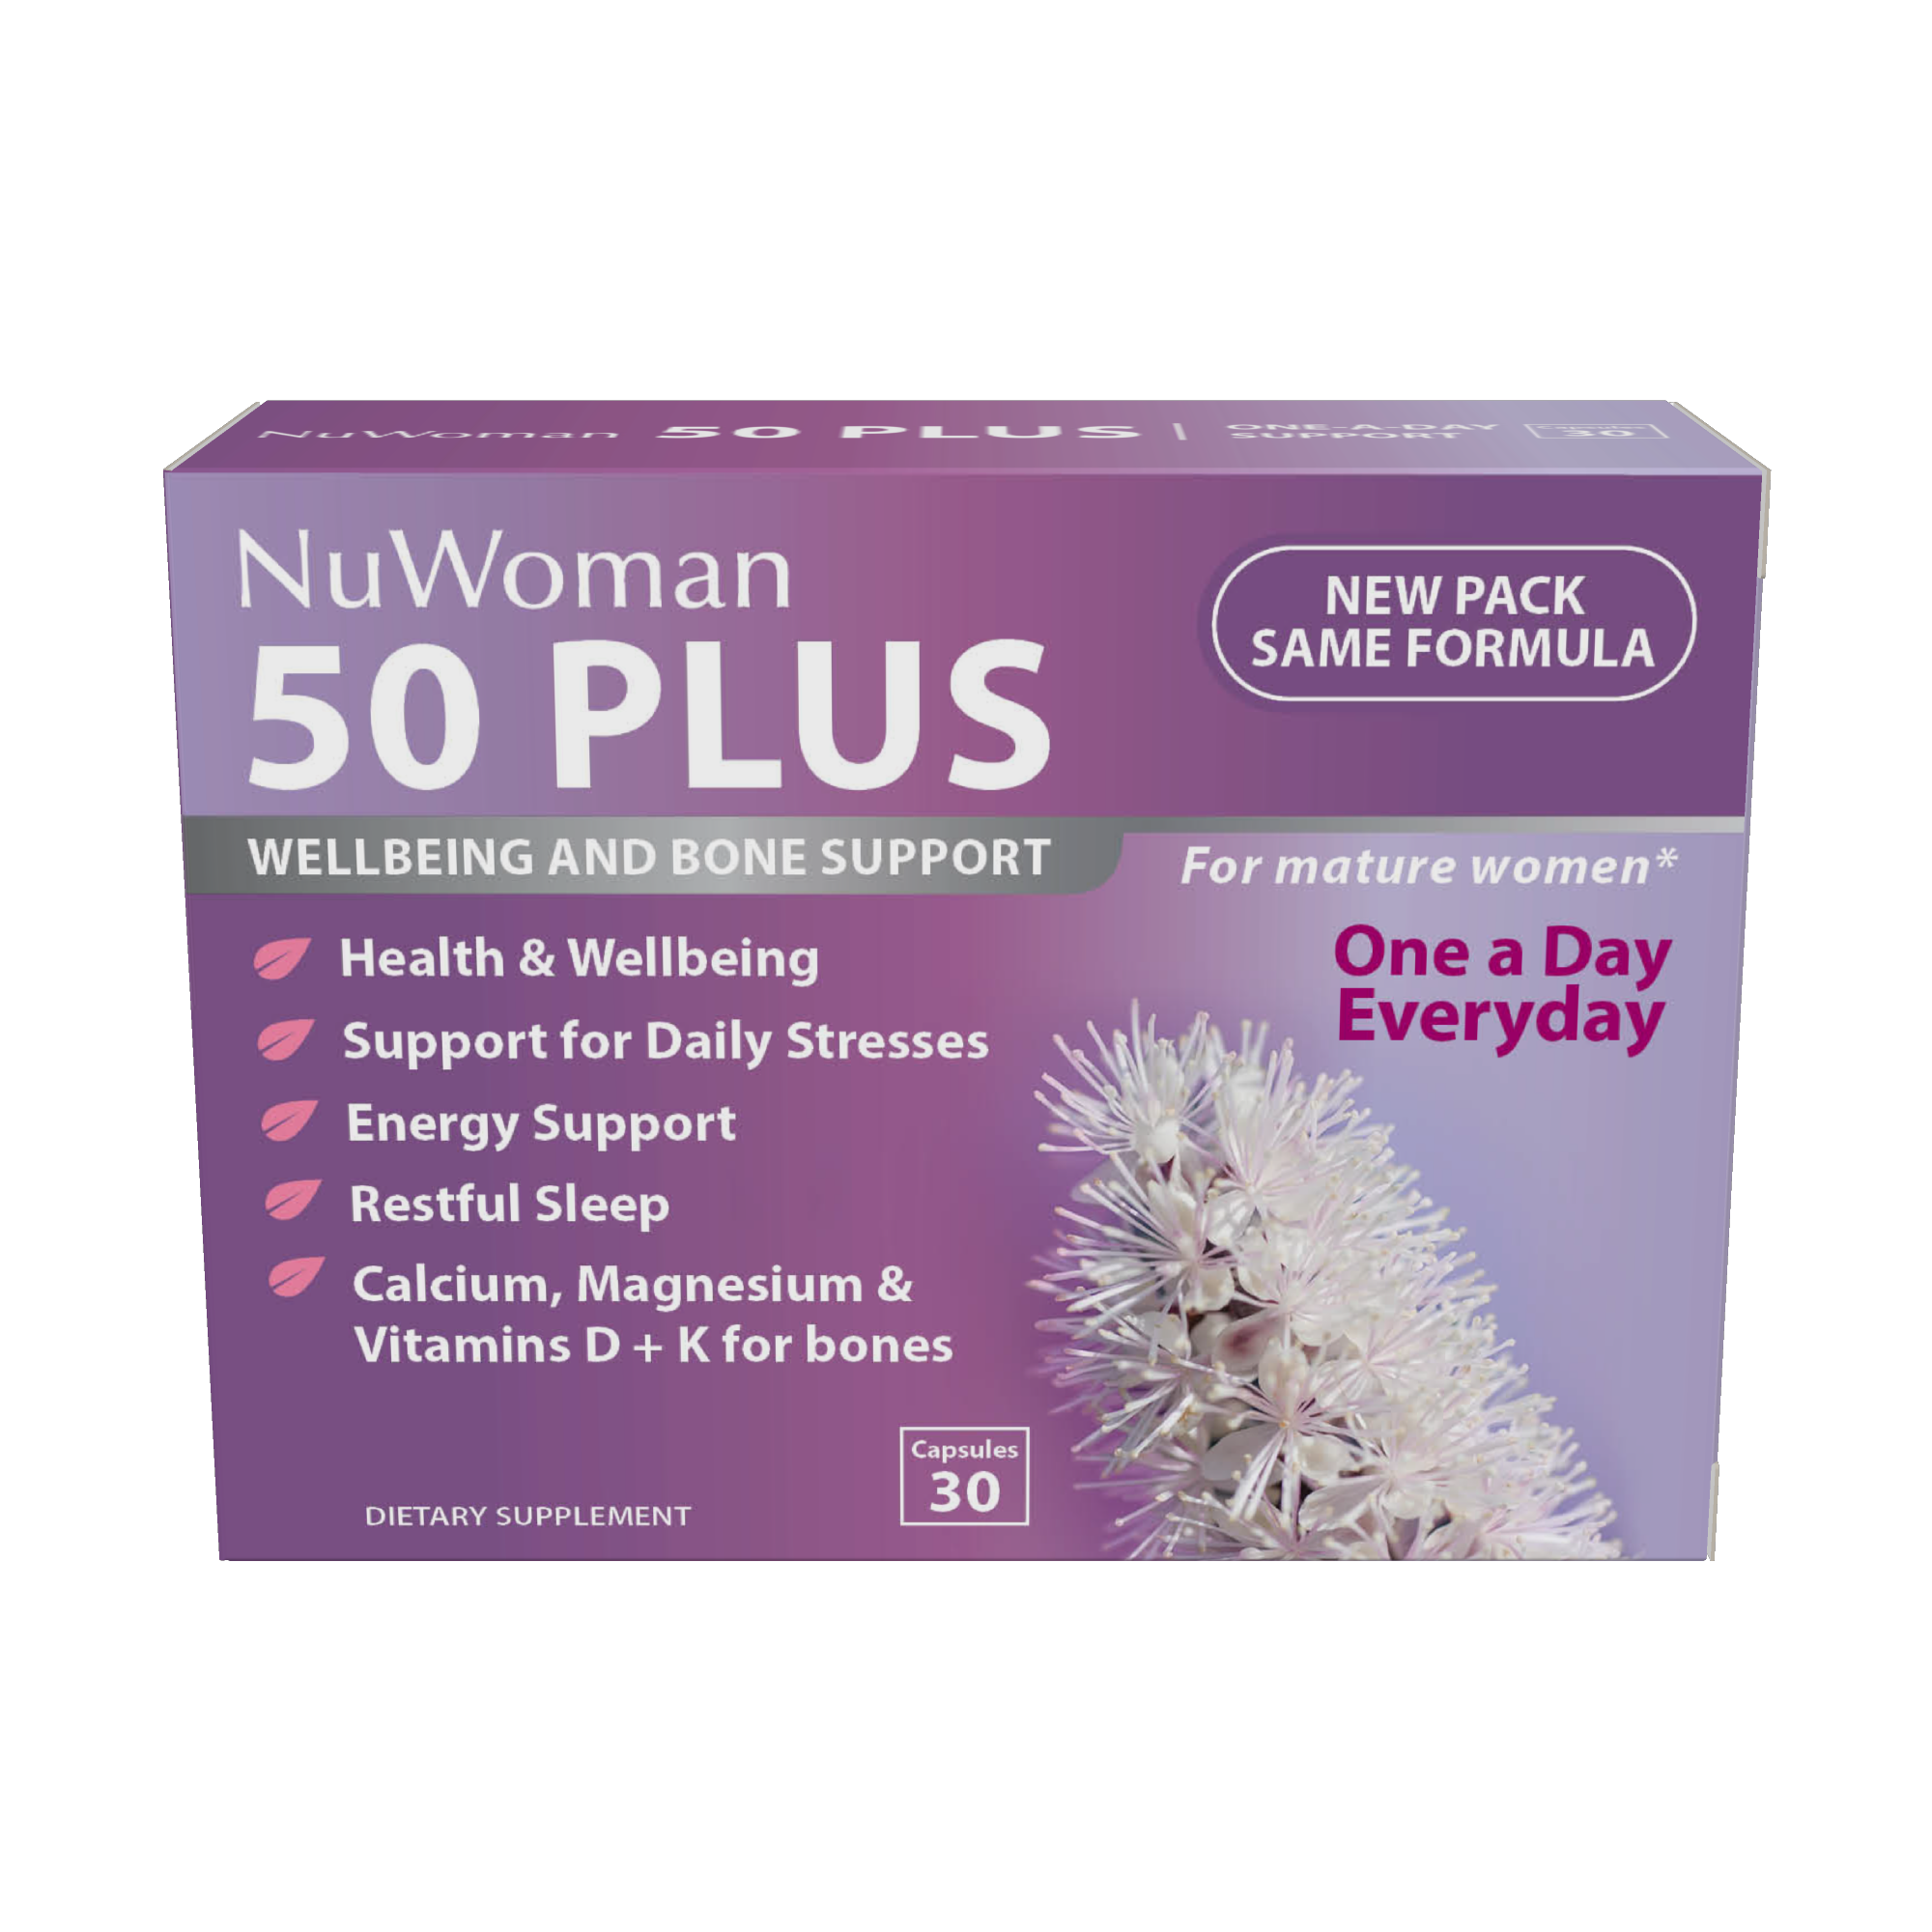 NuWoman 50 Plus Wellbeing and Bone Support